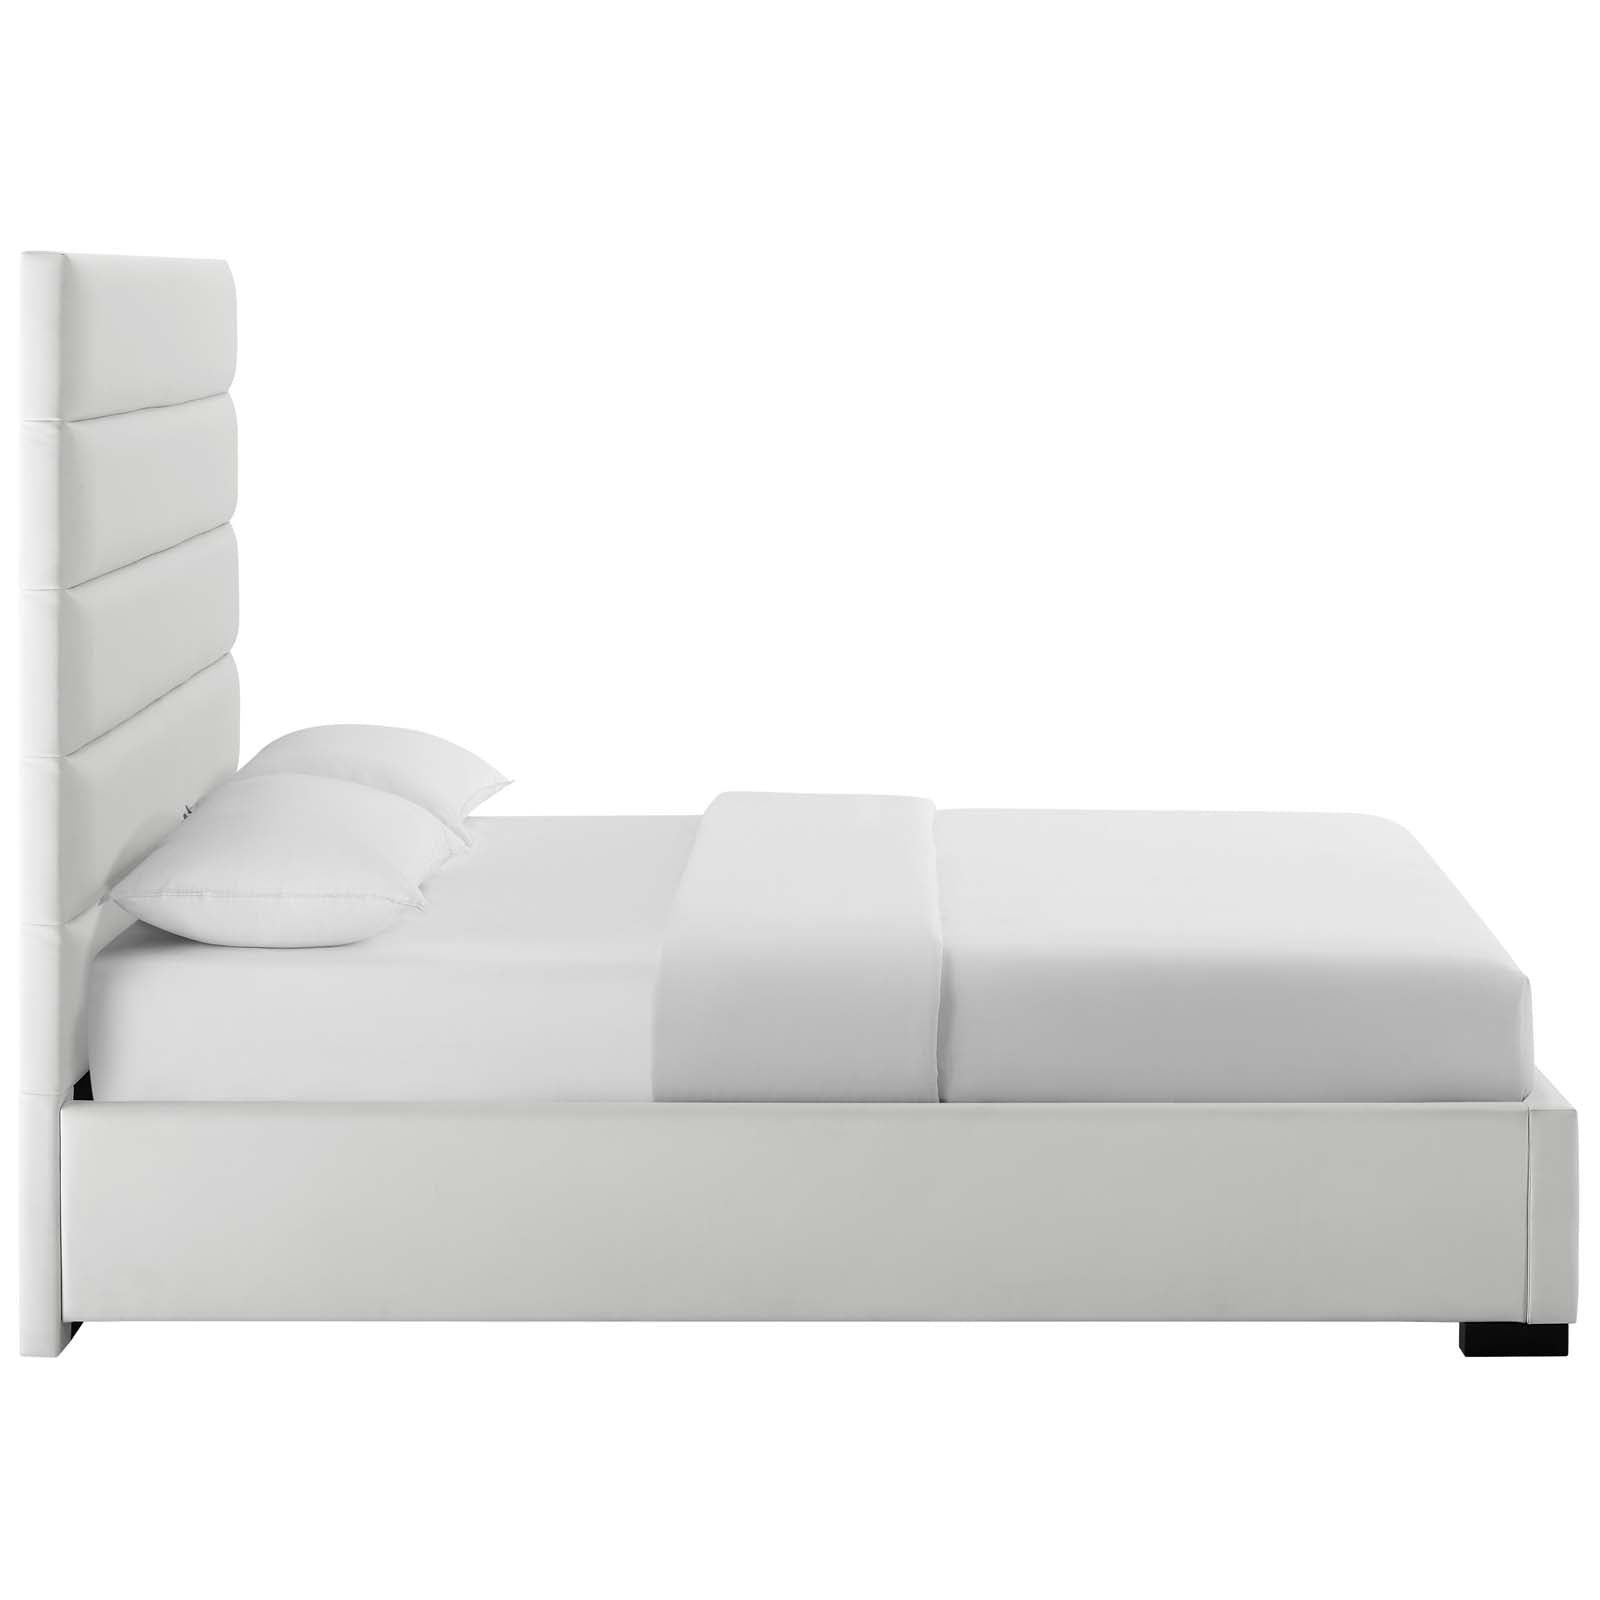 Genevieve Queen Faux Leather Platform Bed - East Shore Modern Home Furnishings